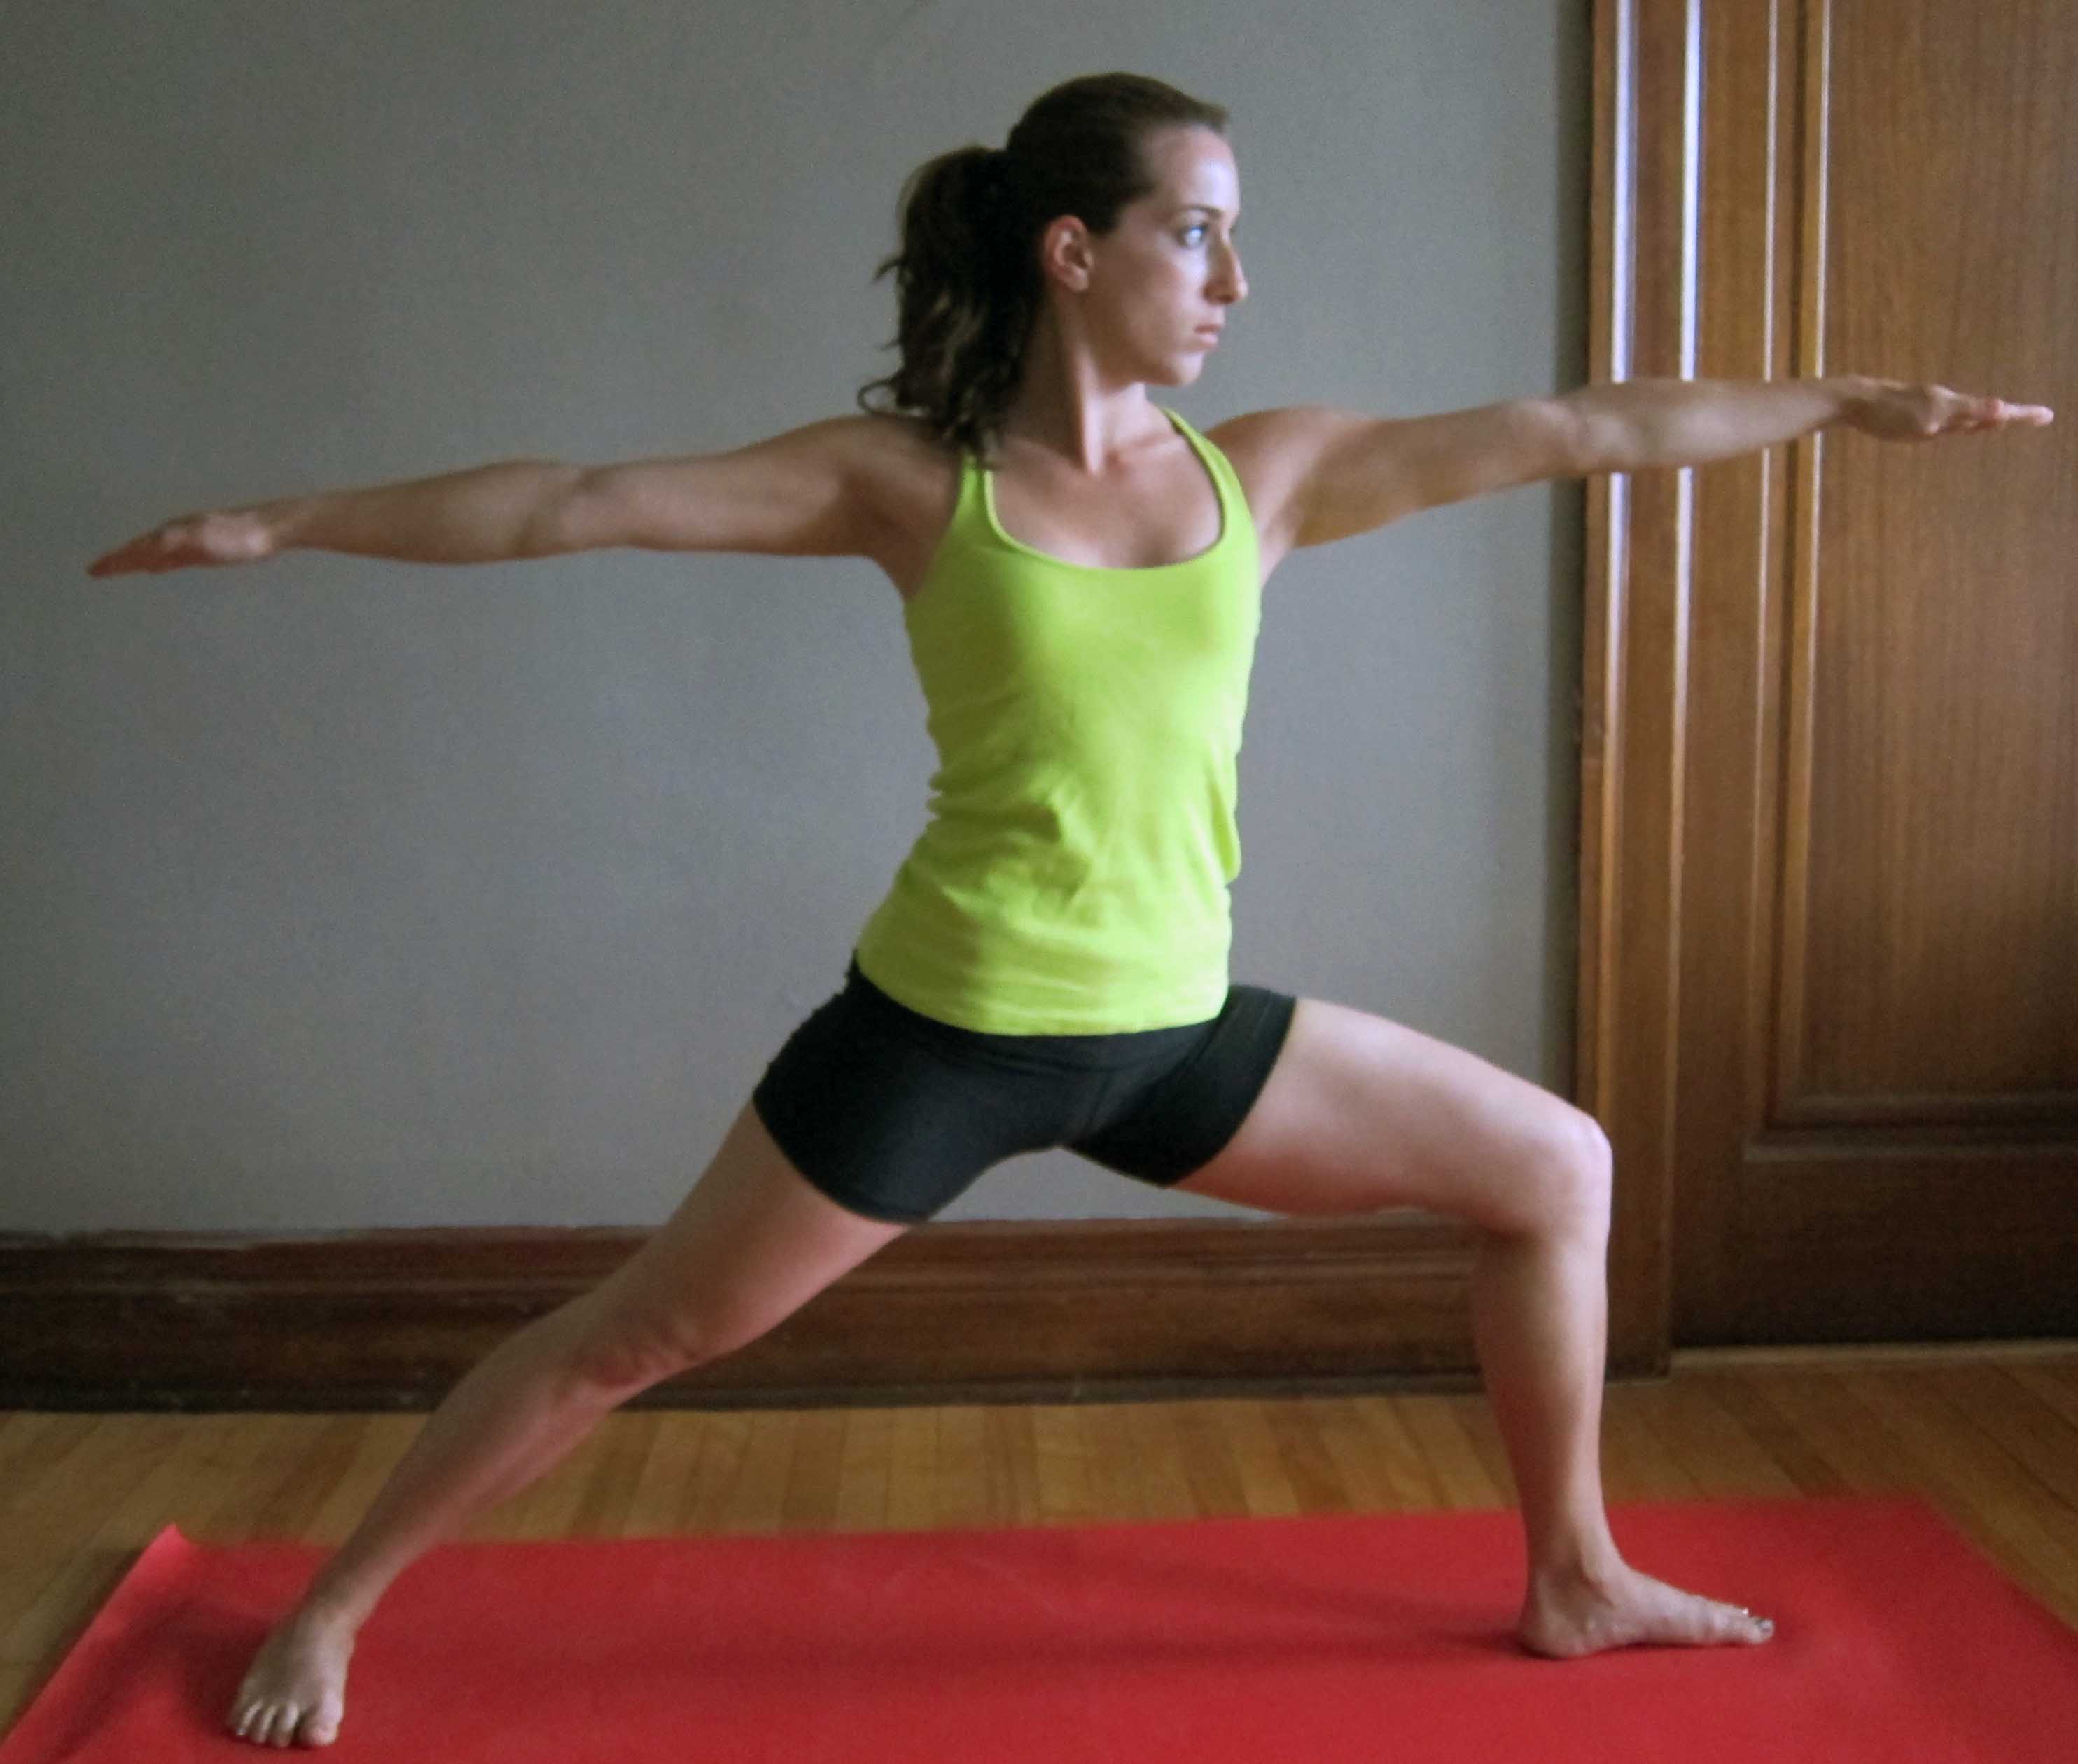 Yoga Exercises for COVID Recovery, According to Experts